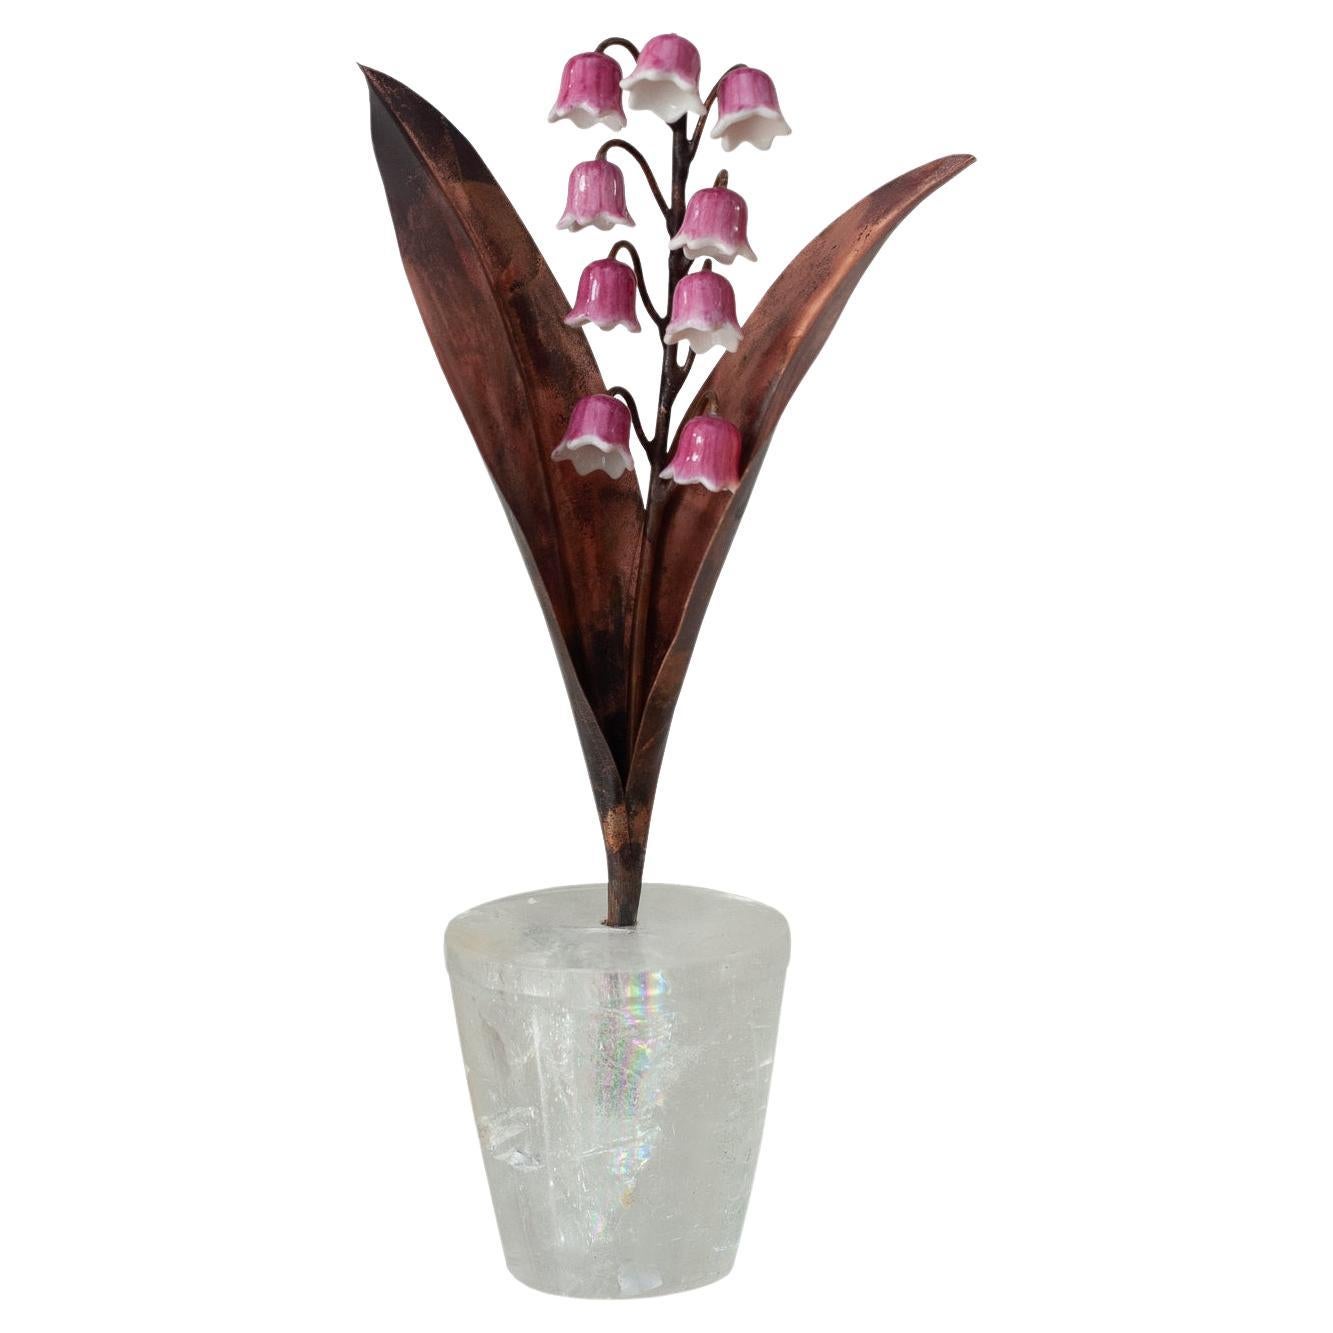 Samuel Mazy x Maison Nurita Pink Glazed Porcelain Lily of the Valley Sculpture For Sale